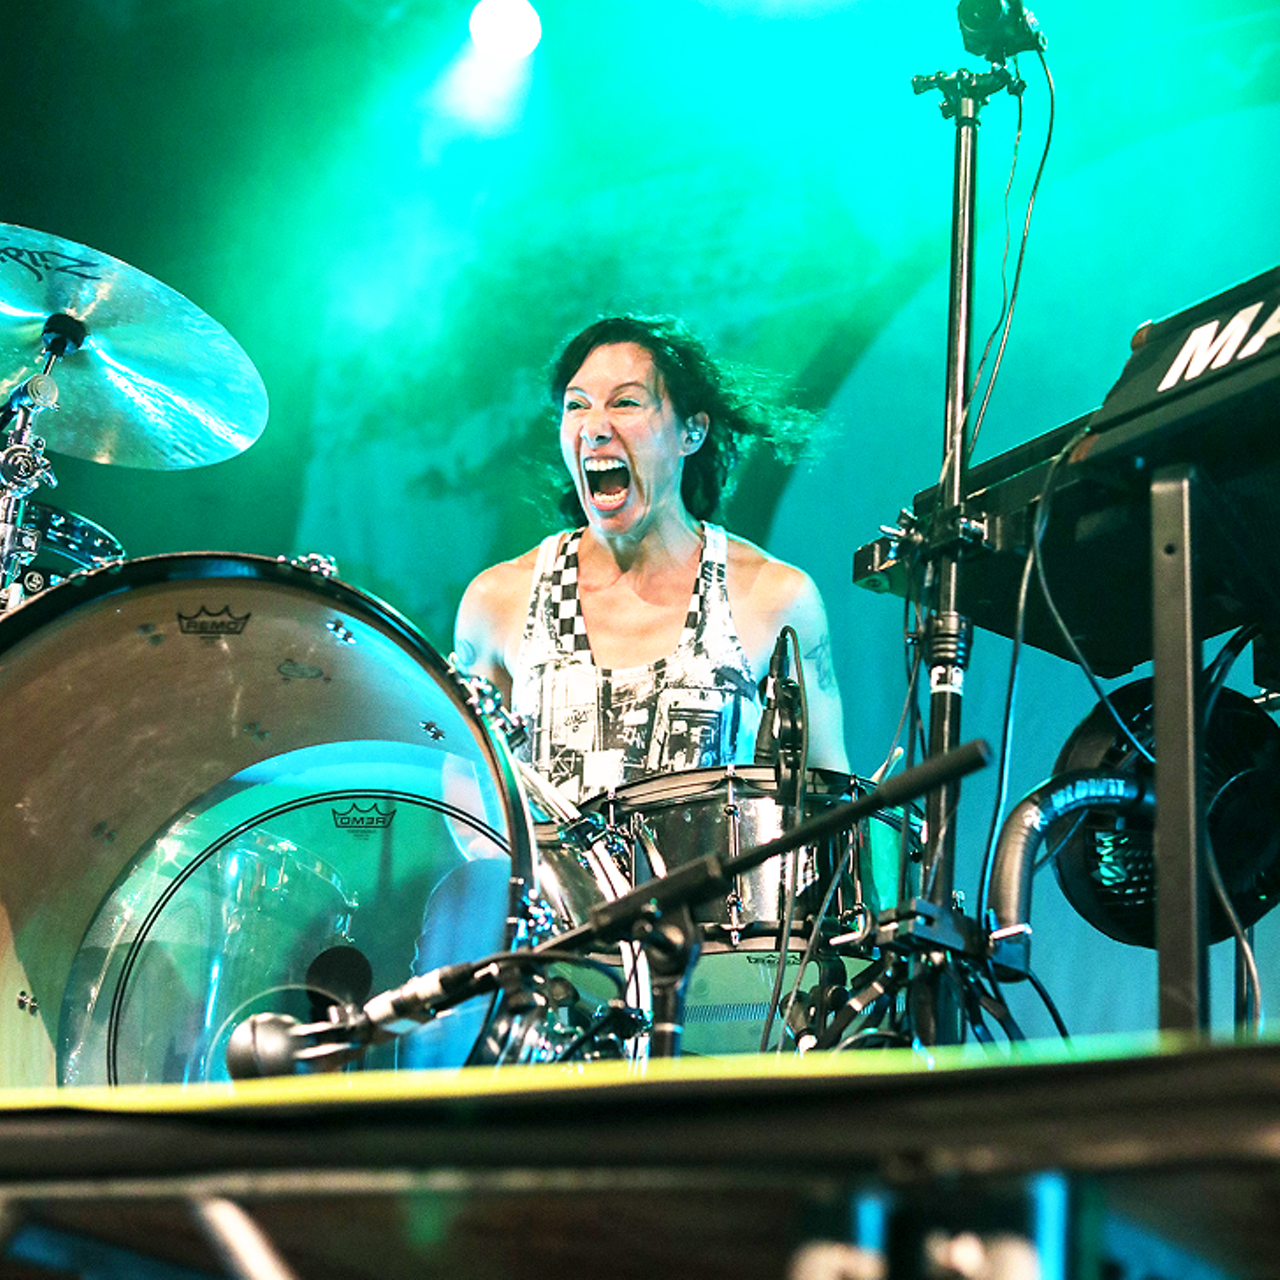 All The Photos from Matt and Kim's Energetic Performance at Covington's Madison Theater (Sept. 19)